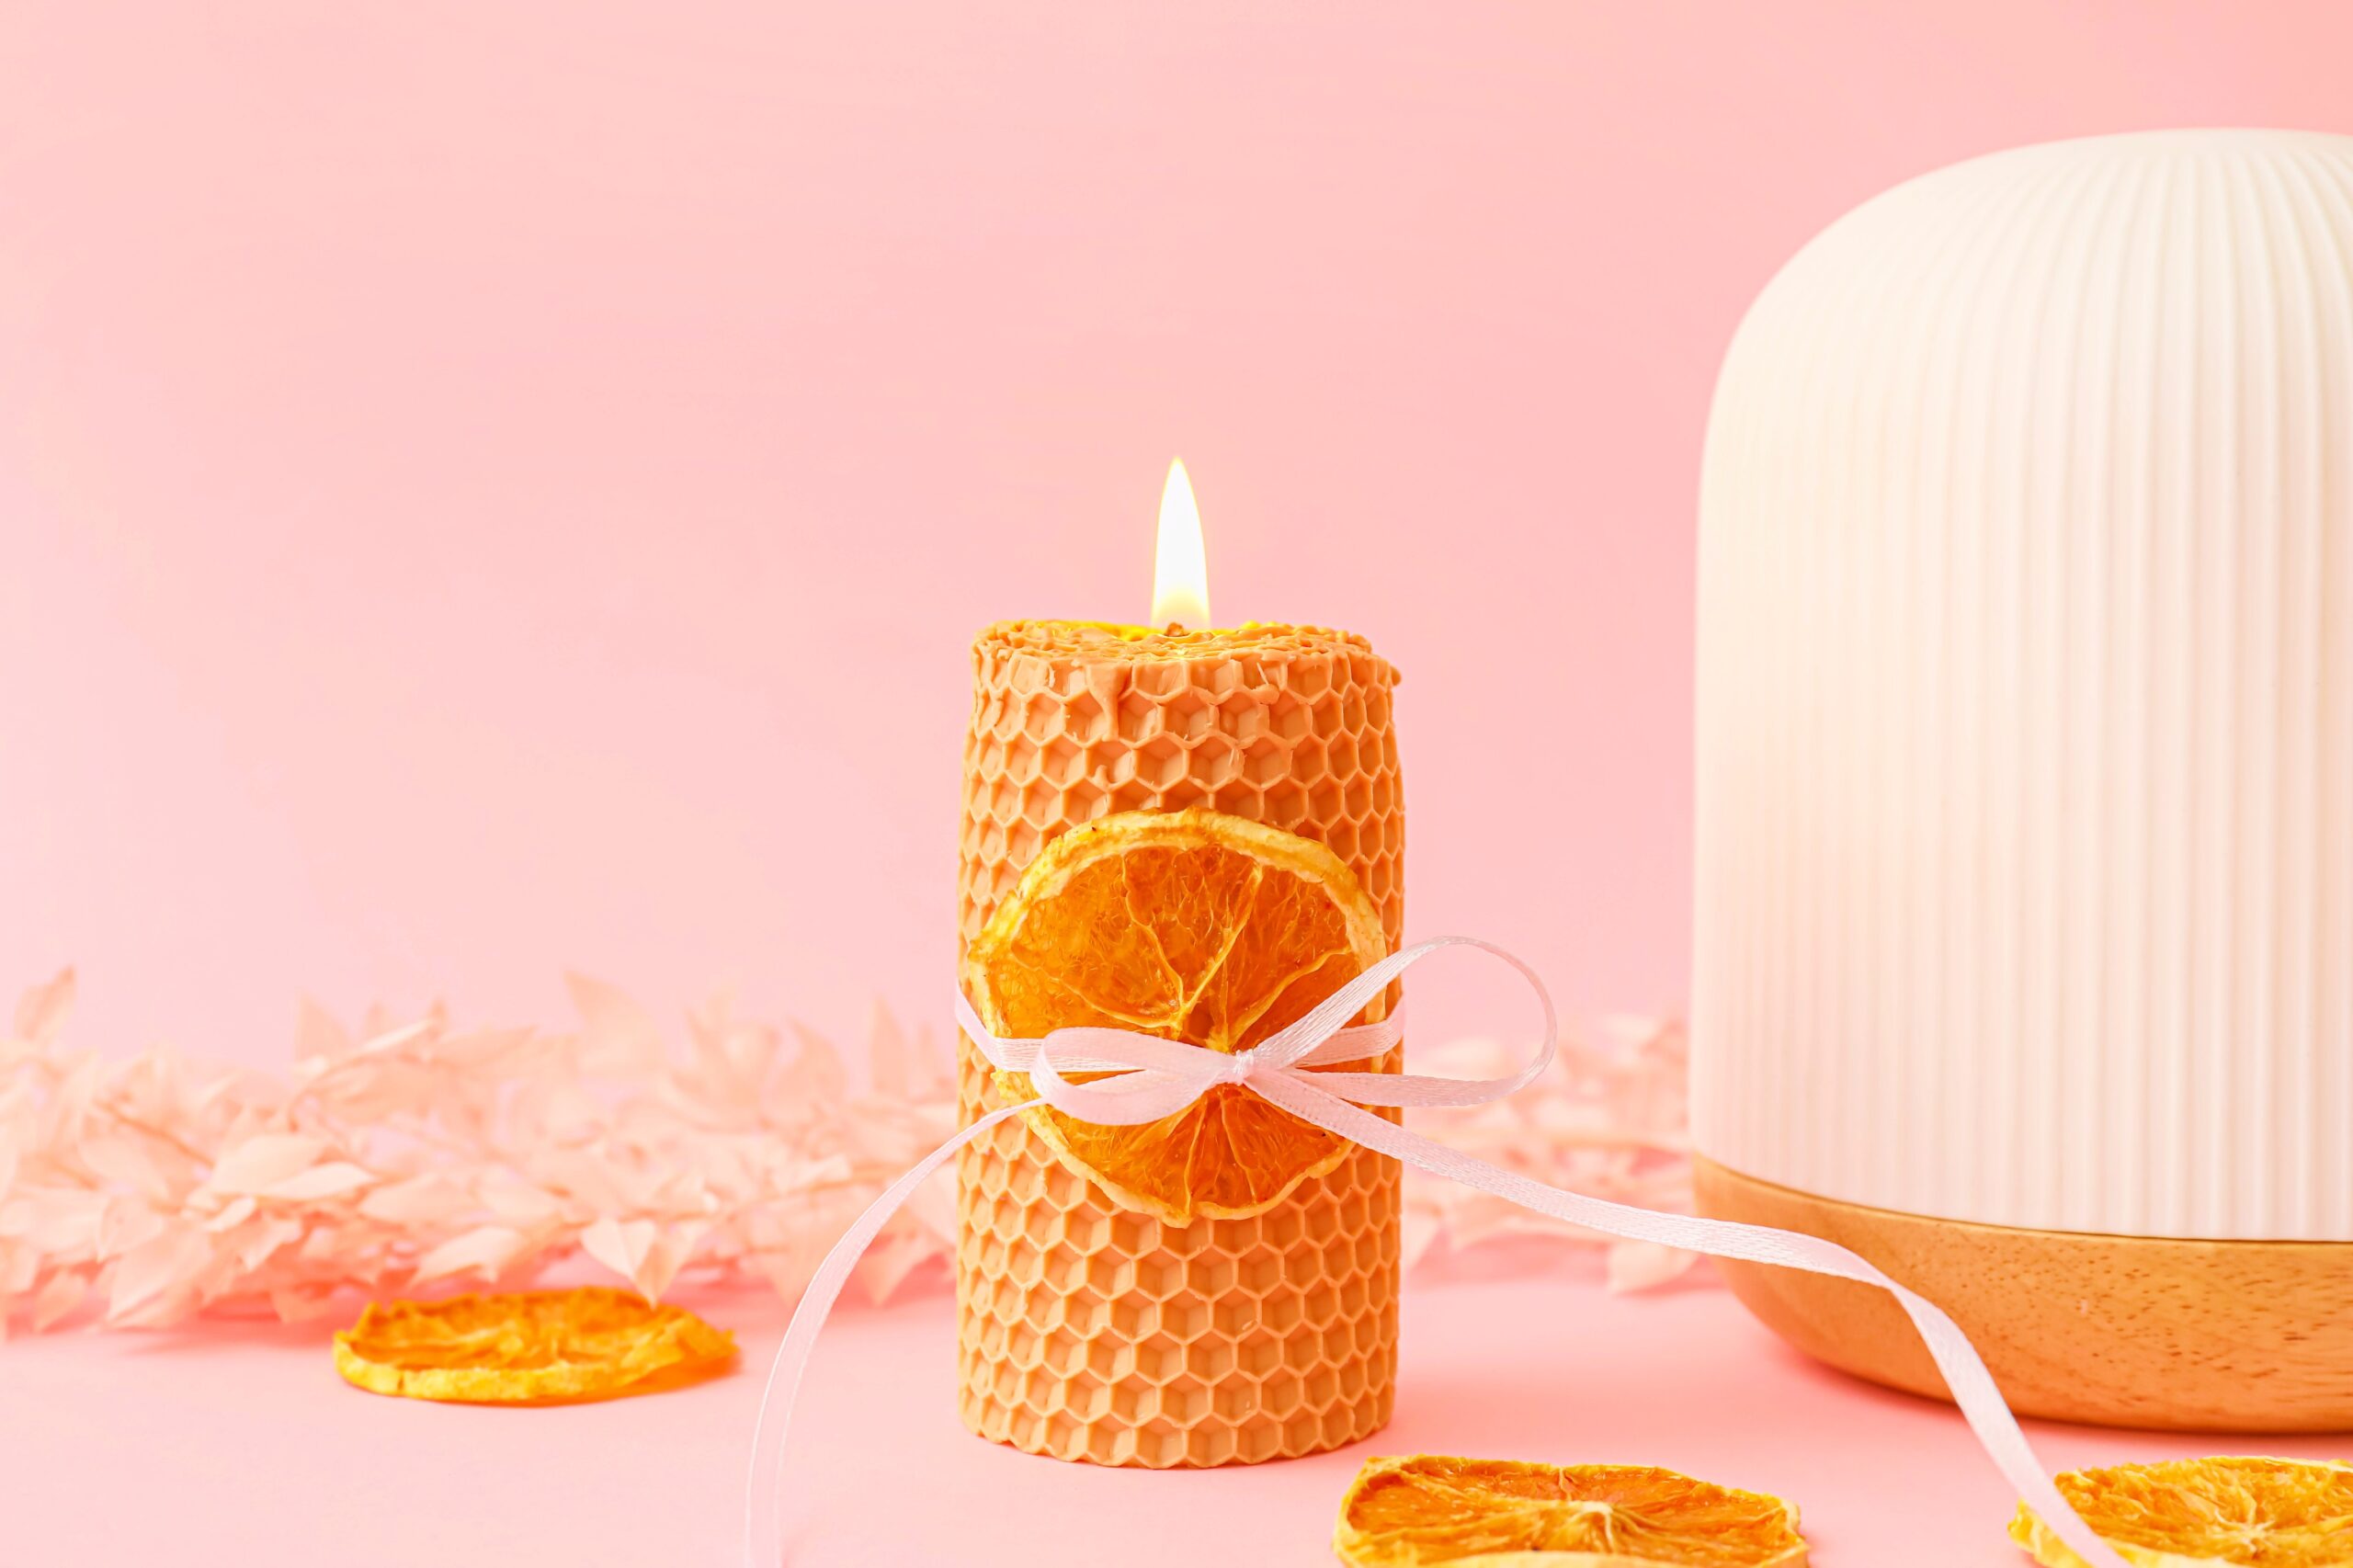 <img src="humidifier.jpg" alt="humidifier and orange candle"/>